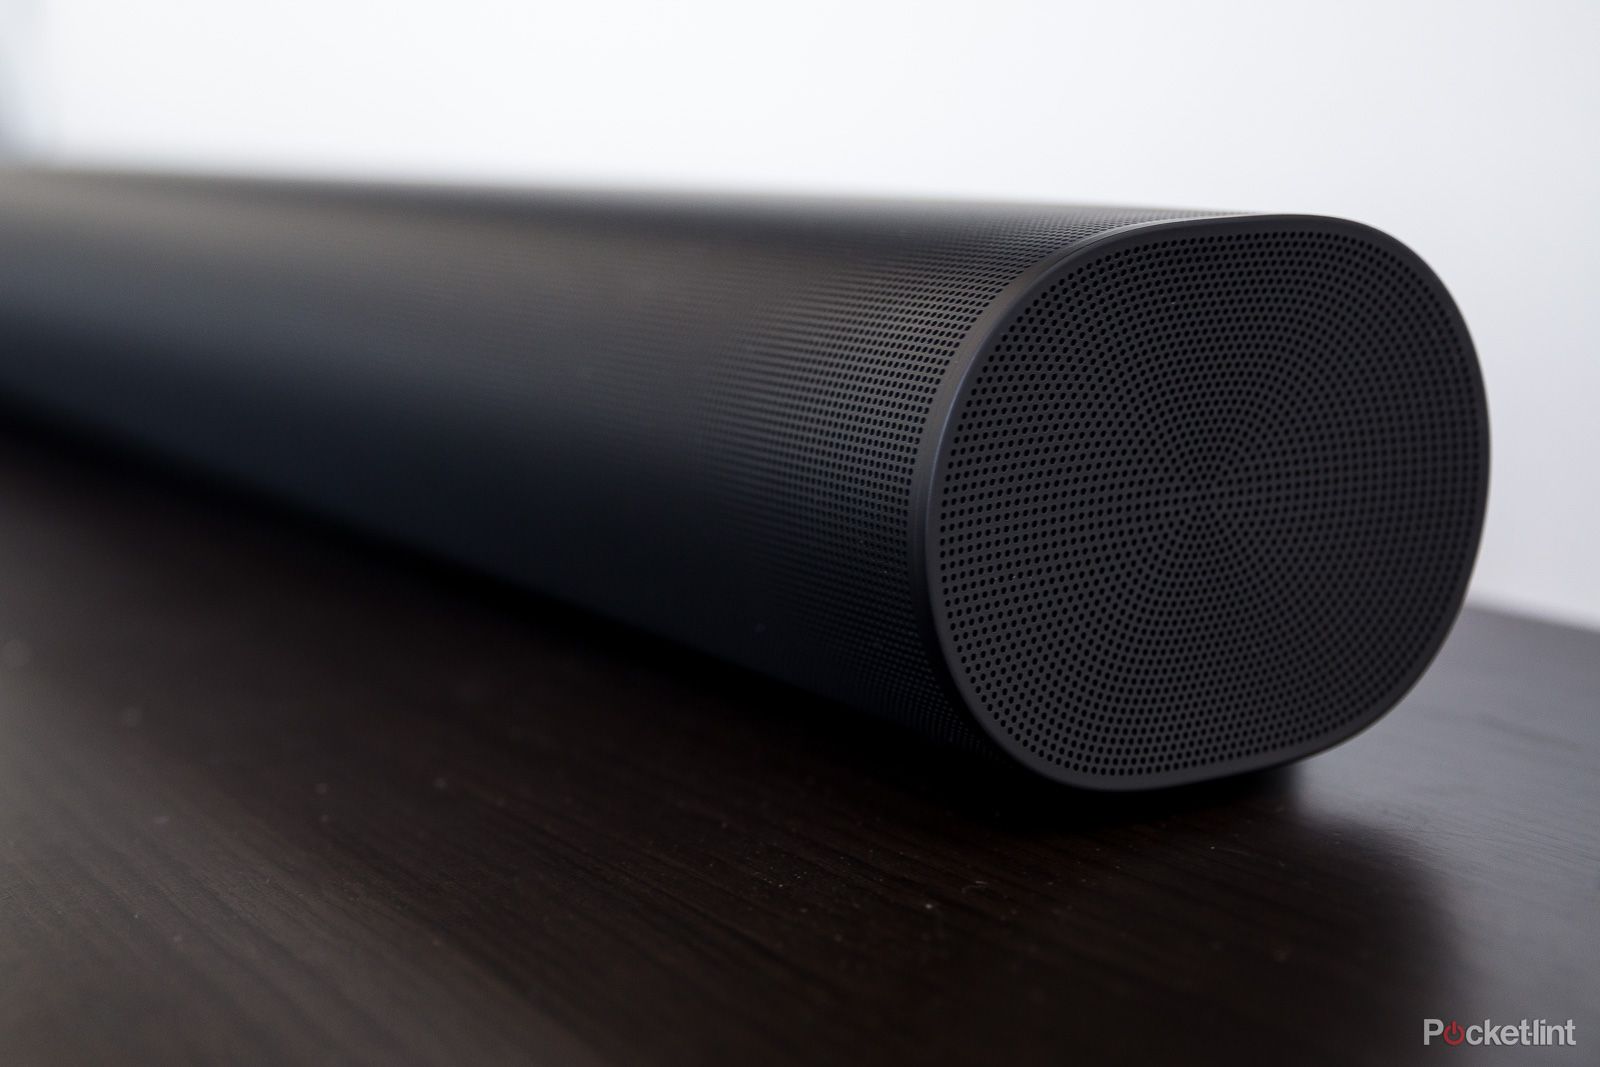 The Sonos Arc is the long-awaited Playbar update with Dolby Atmos support